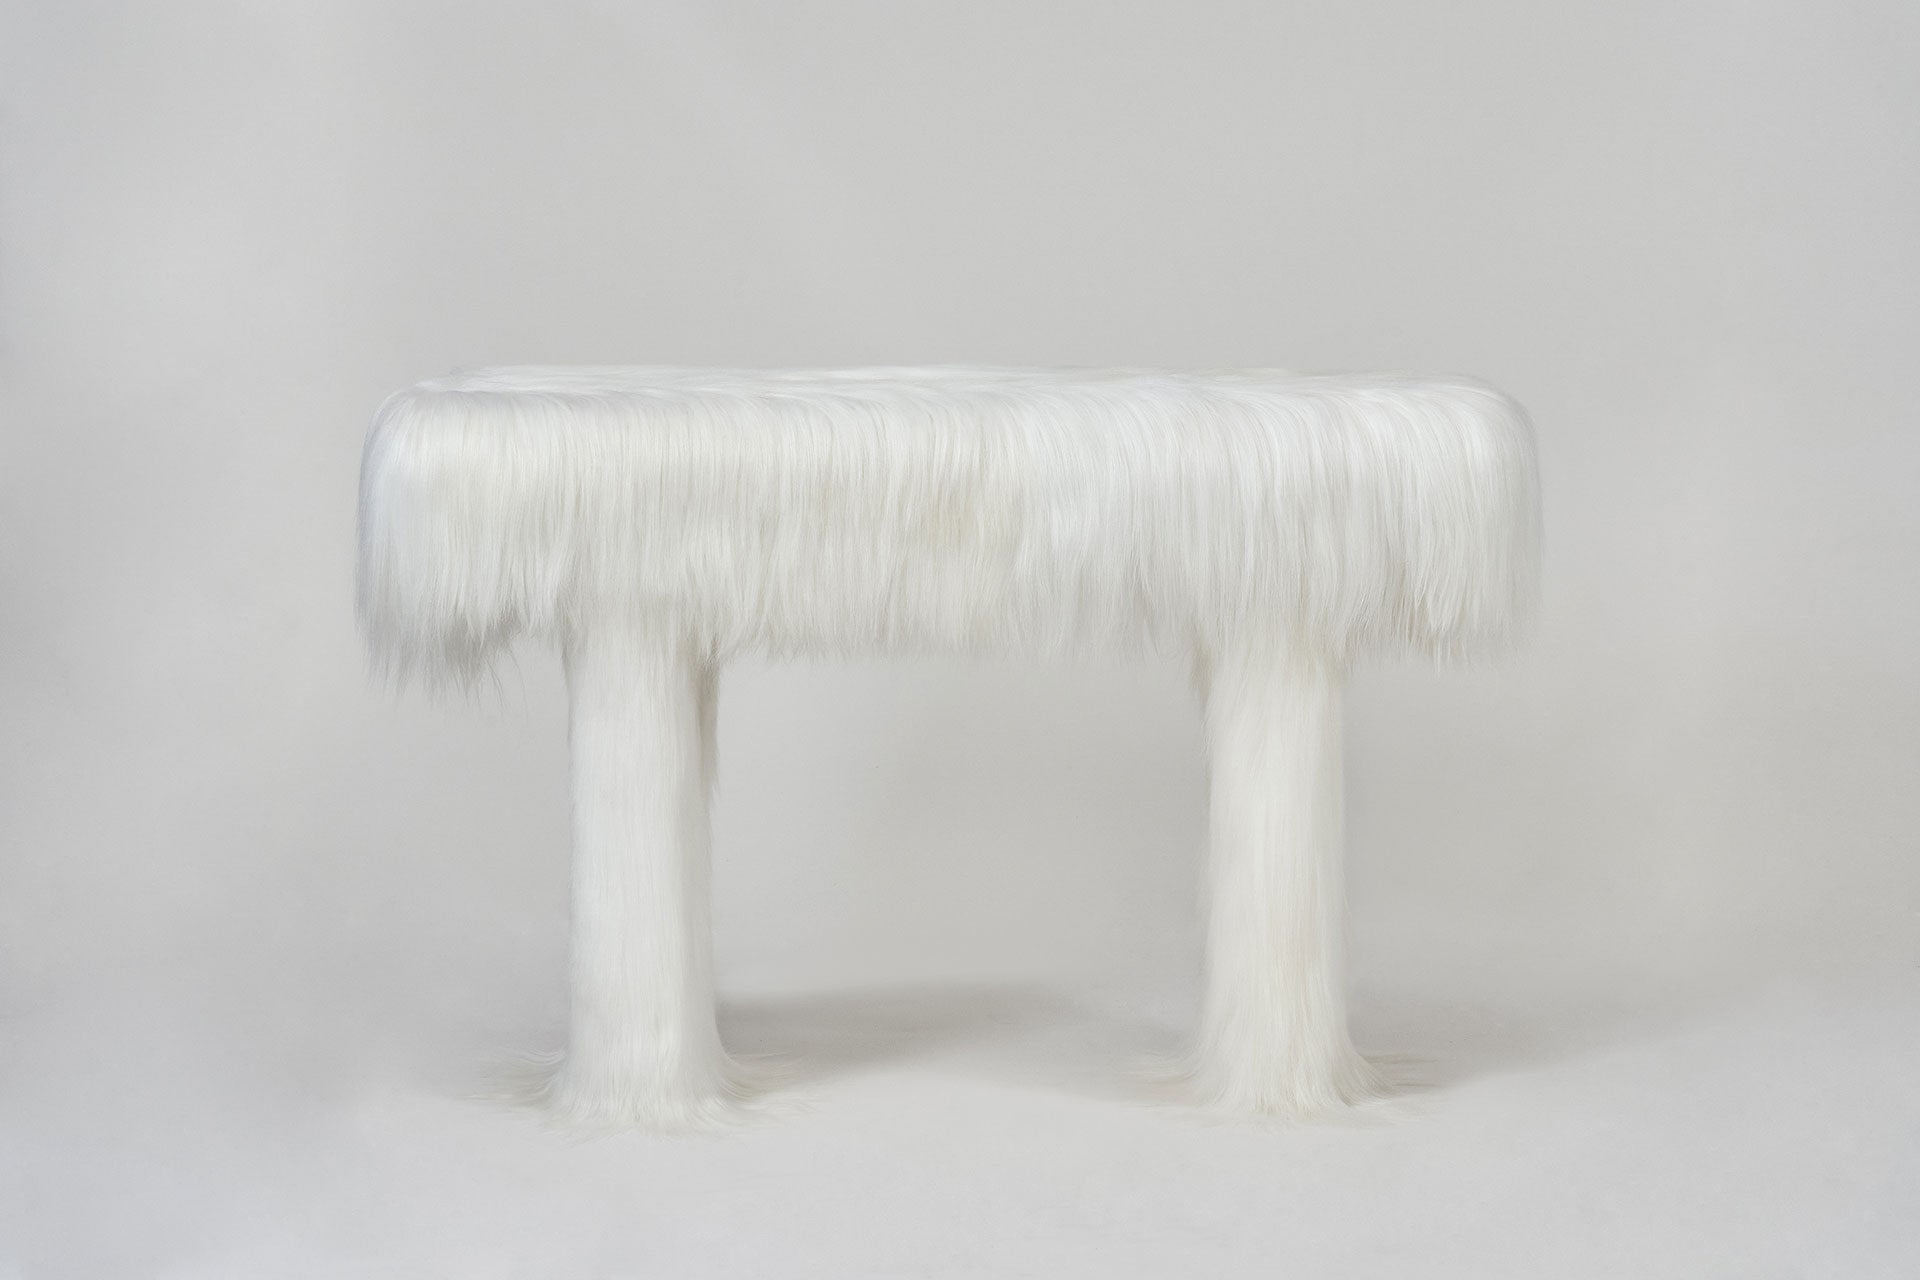 Raw Console/ Chen Furong, 2021/ Cashmere Goat Hair/ Courtesy of Chen Furong and Objective Gallery